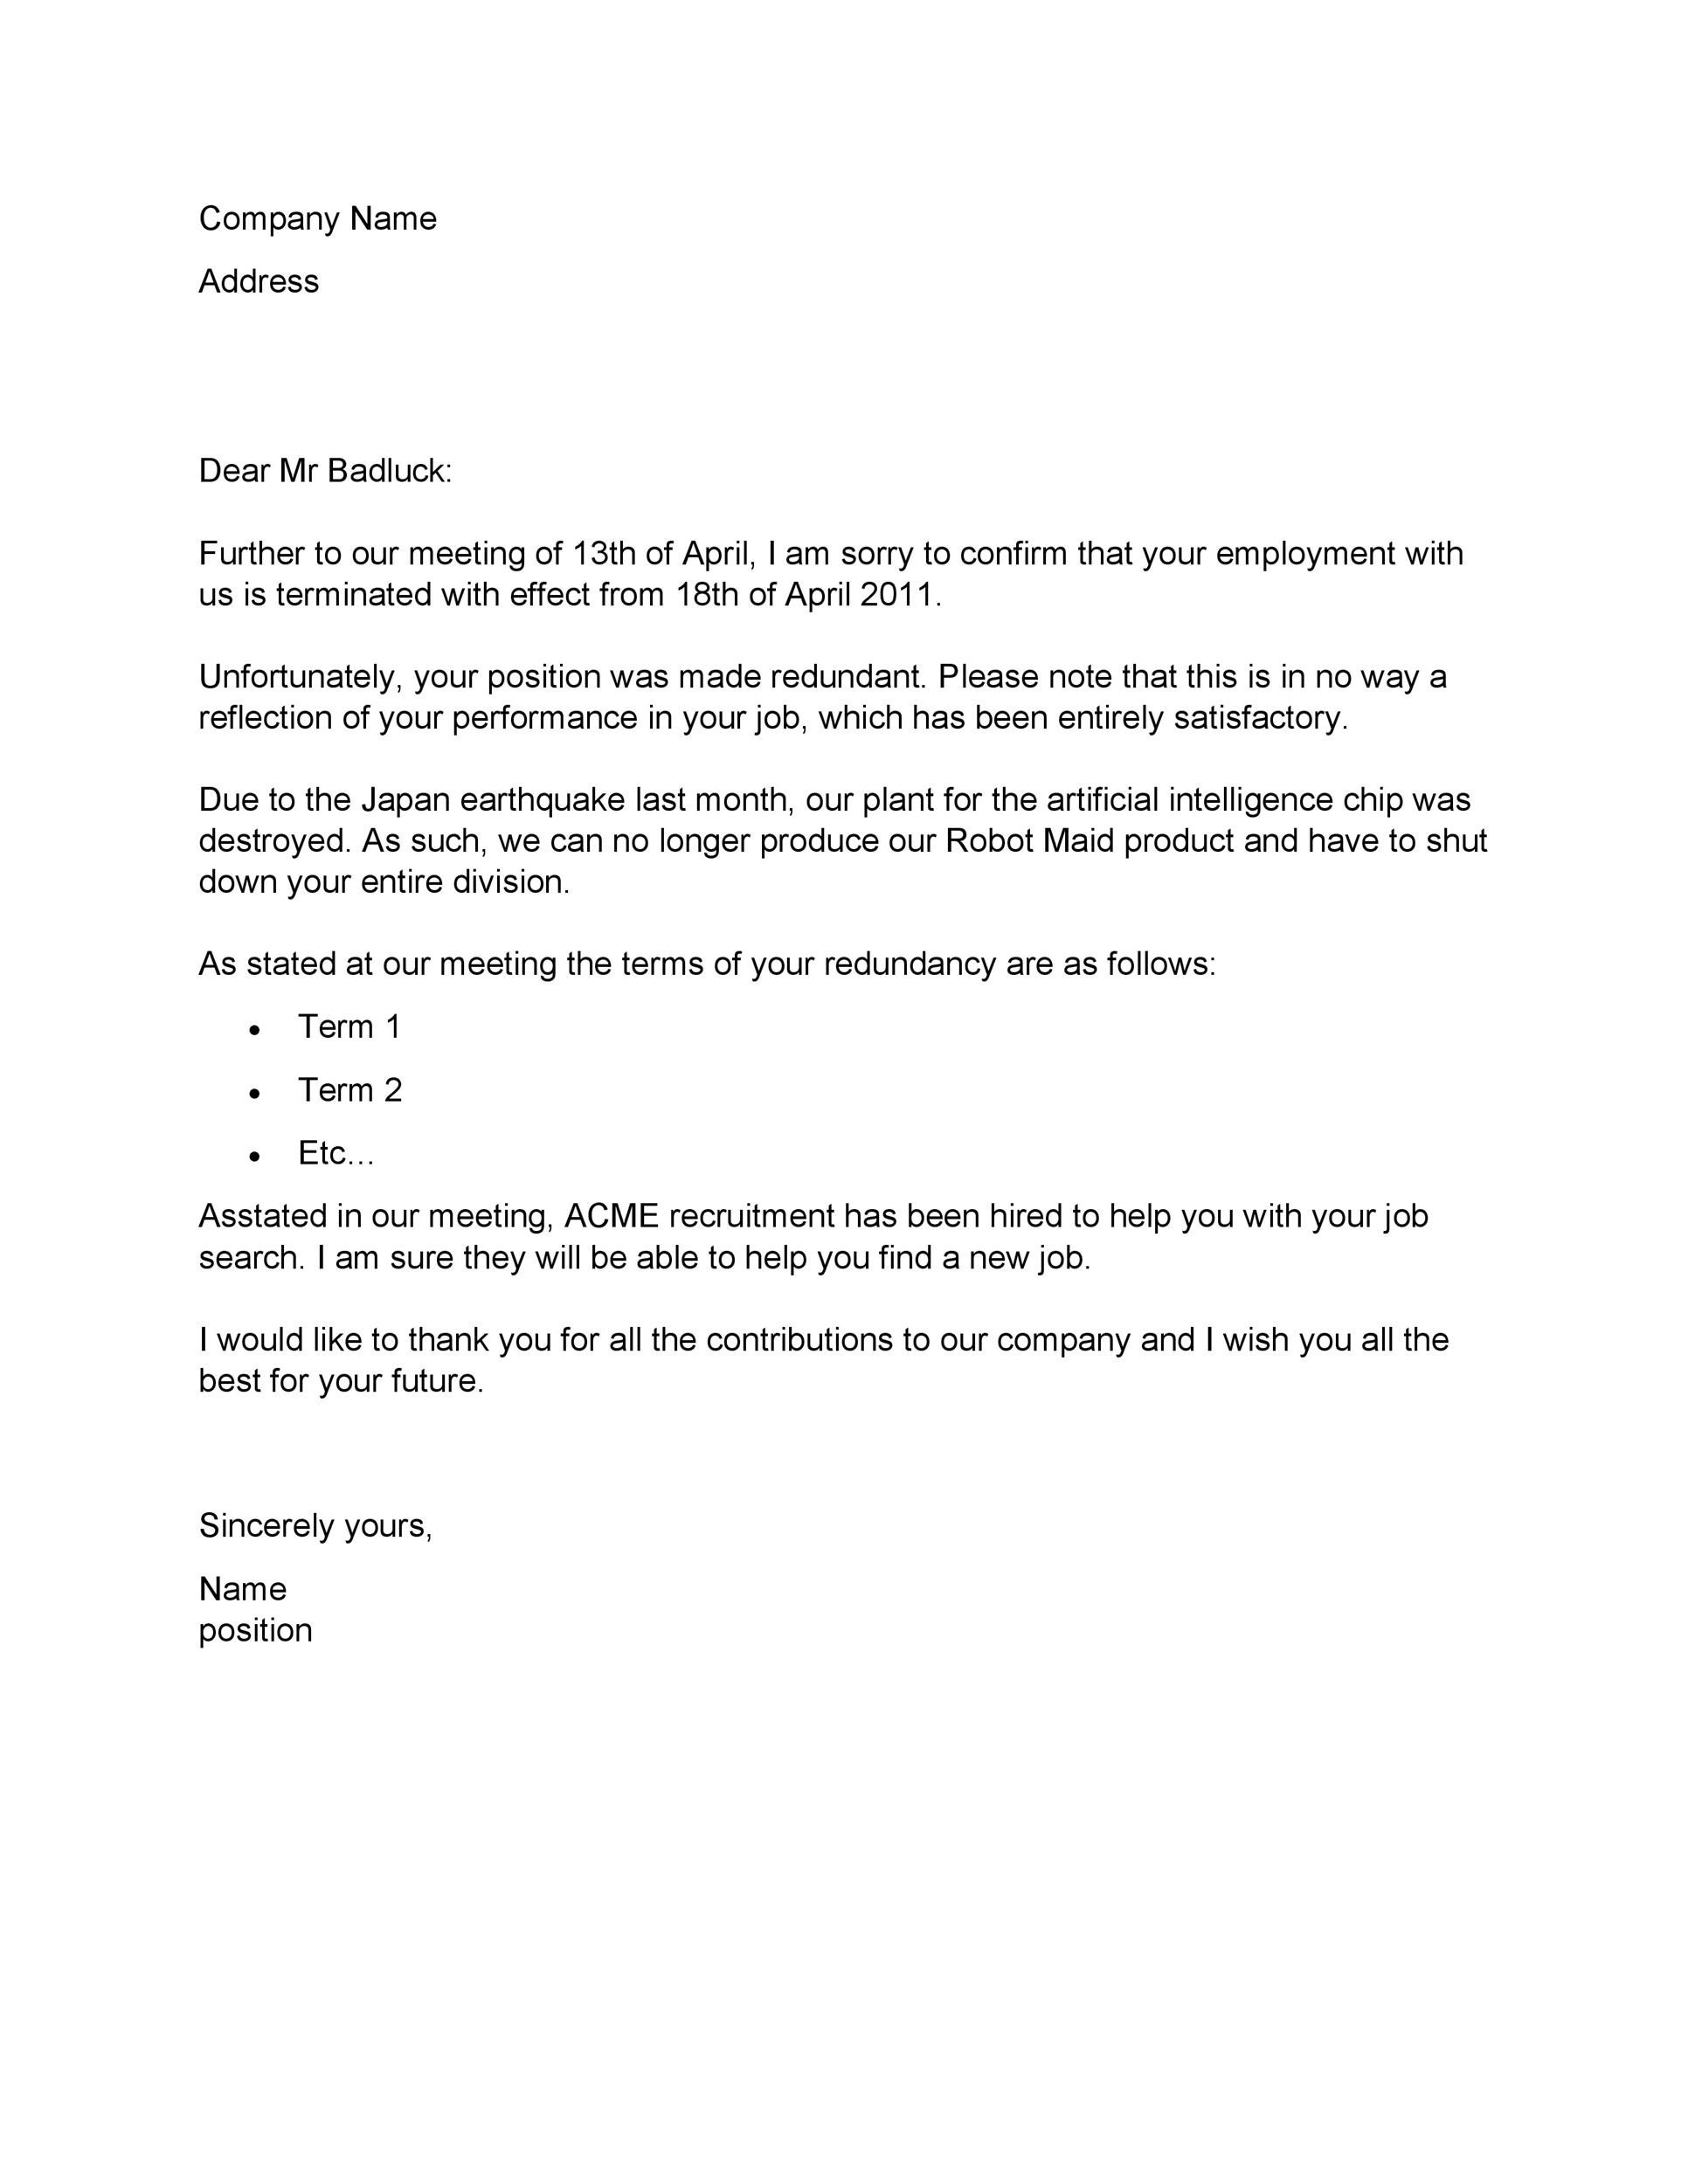 35 Perfect Termination Letter Samples Lease Employee Contract